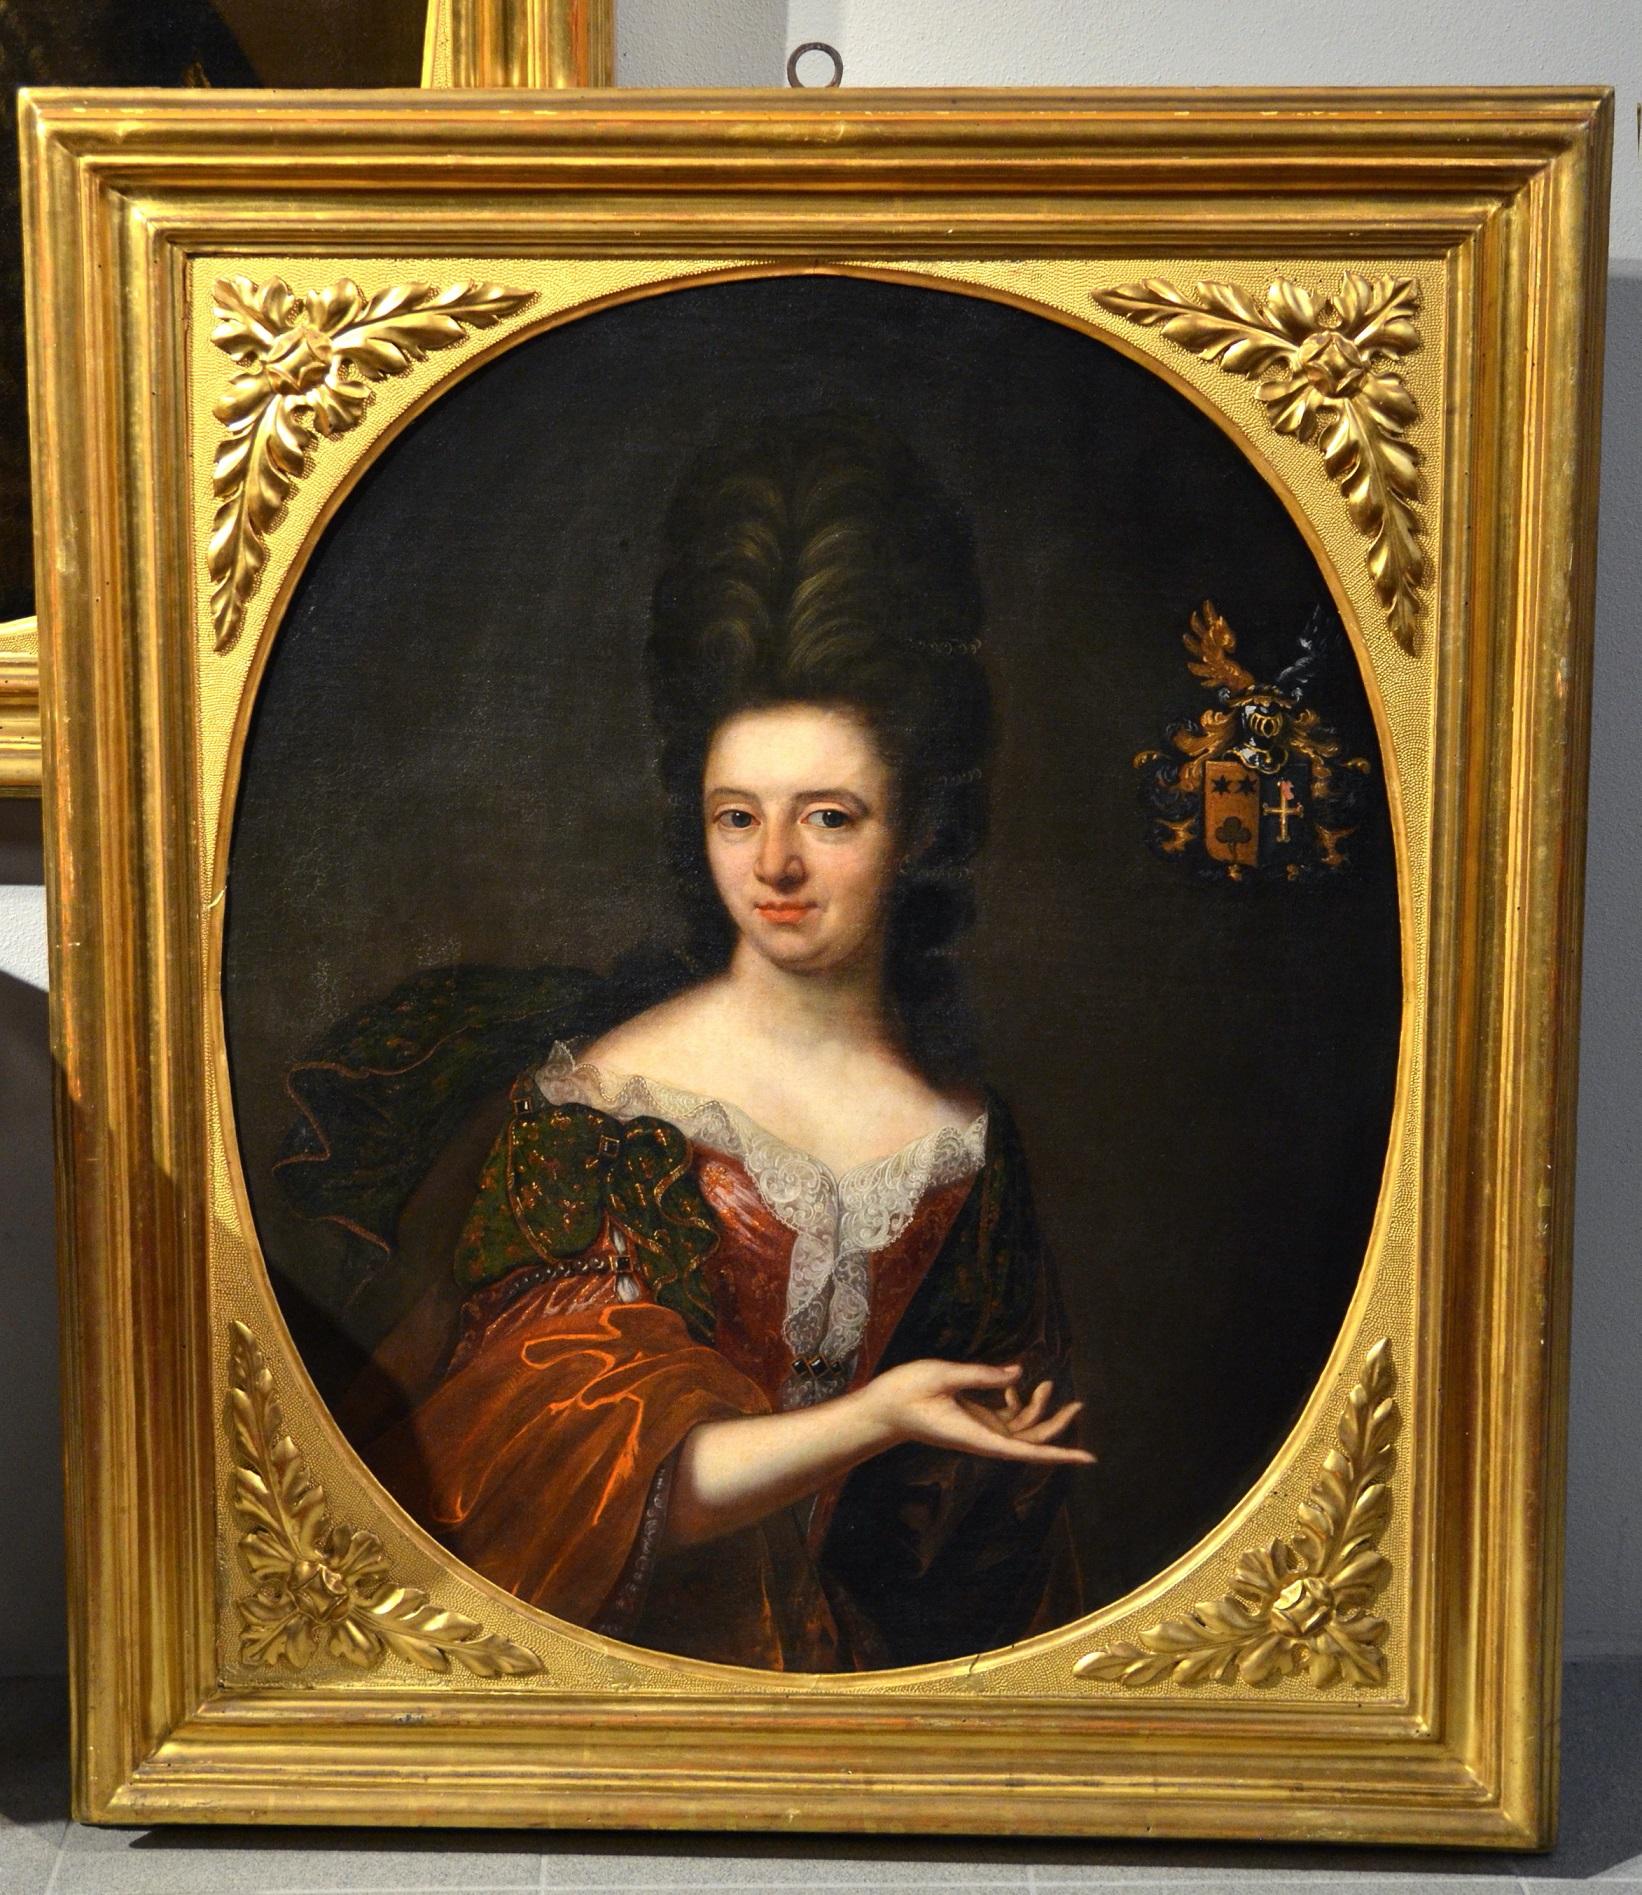 Portrait 17th Century Noble Lady Paint Oil on canvas 17th Century Italy Florence - Brown Portrait Painting by Painter active in Florence in the late 17th century